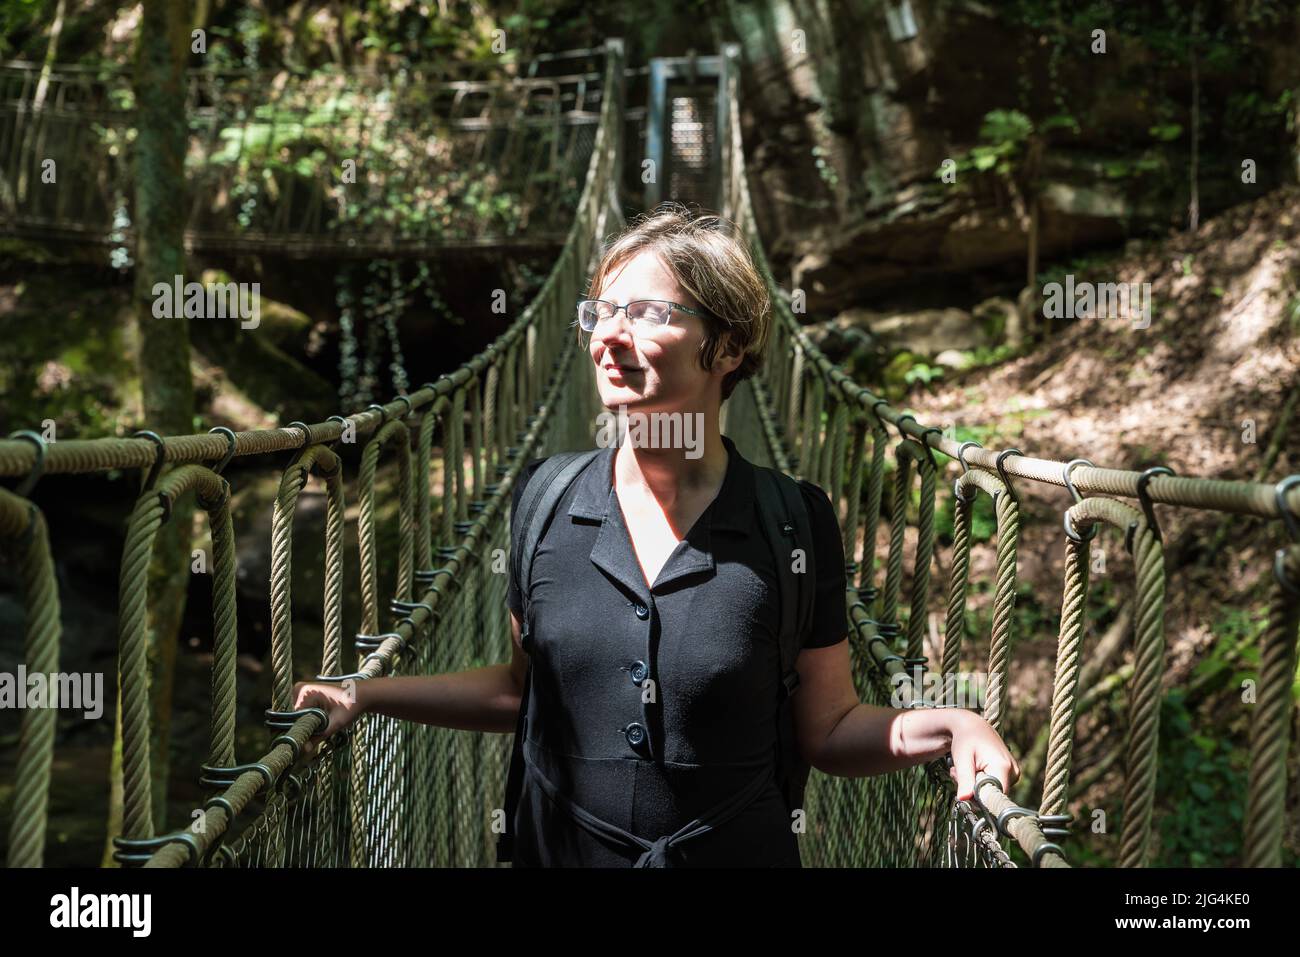 Portrait of a woman at a wooden suspension bridge over a small creek valley in the woods, Kordel, Belgium Stock Photo